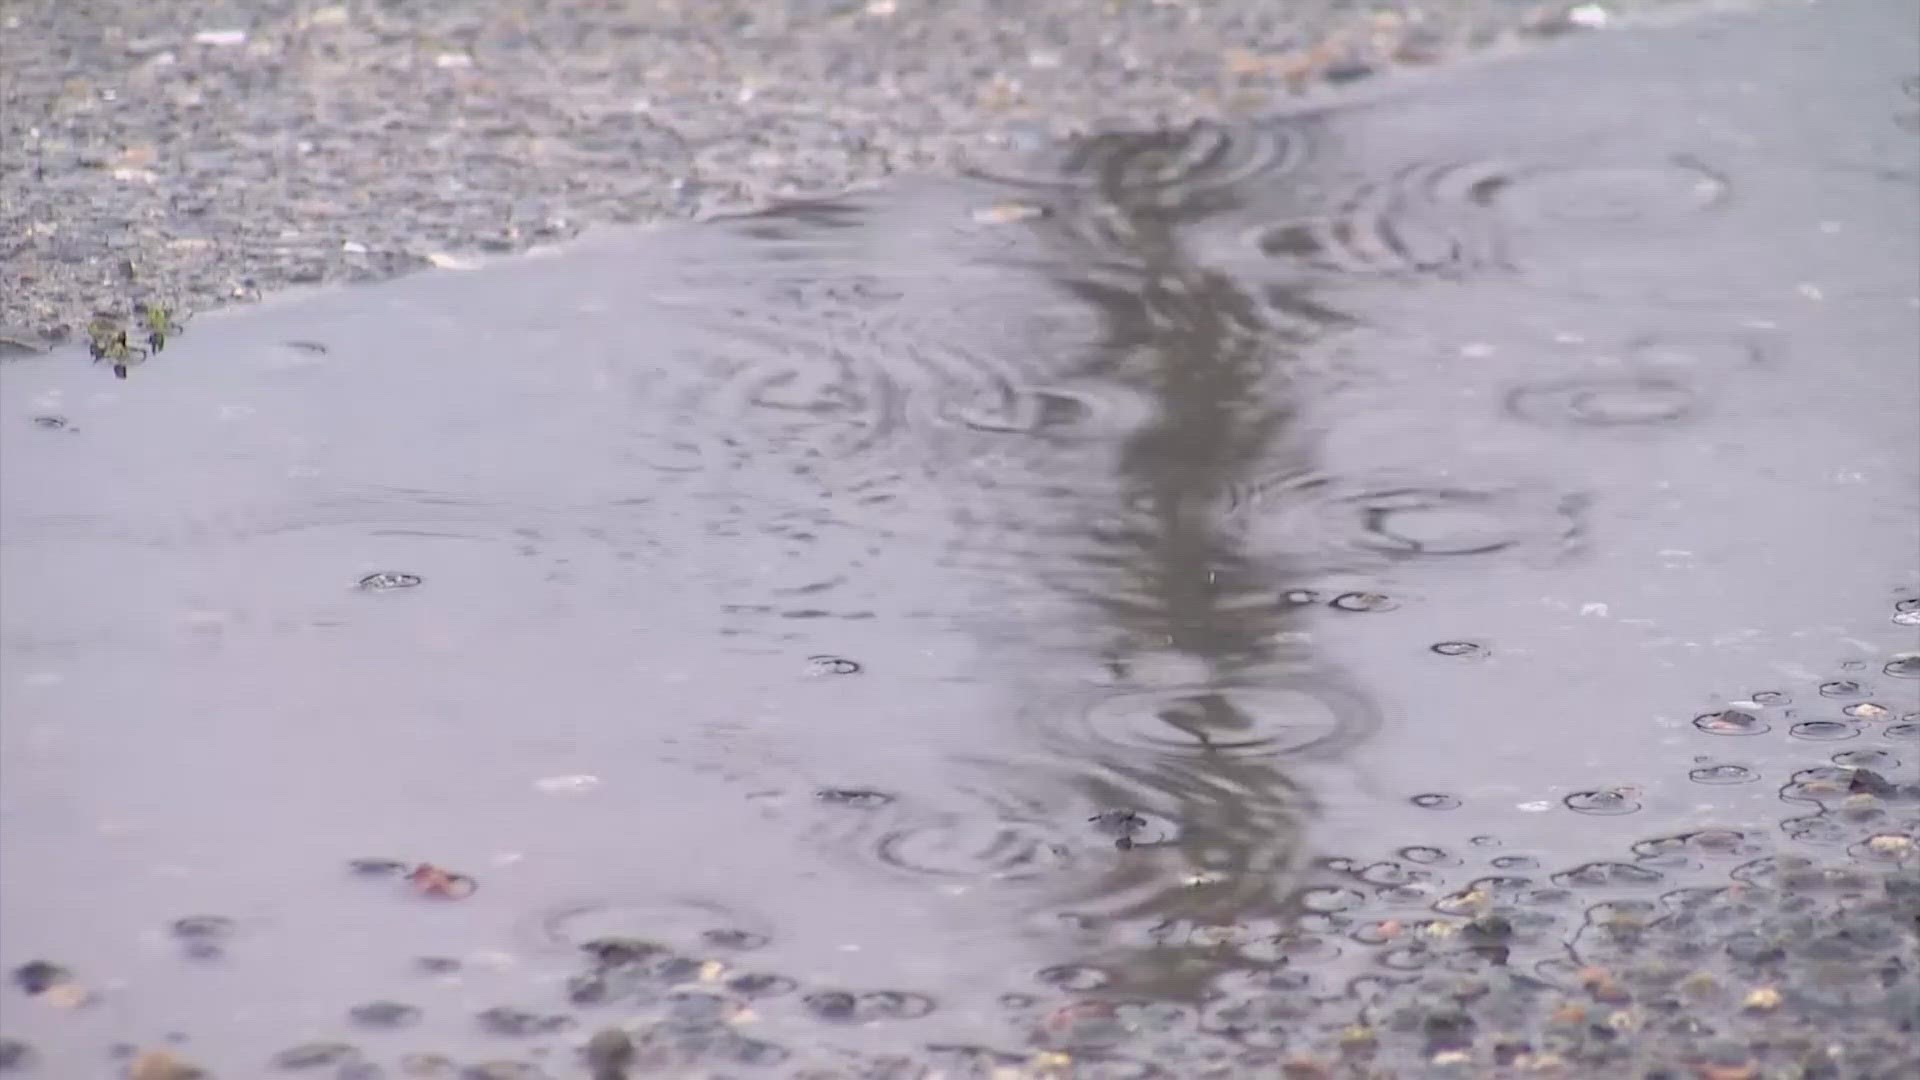 Western Washington typically averages 3 inches of rainfall between June and August, but this year there was just over 1 inch that fell over that period of time.